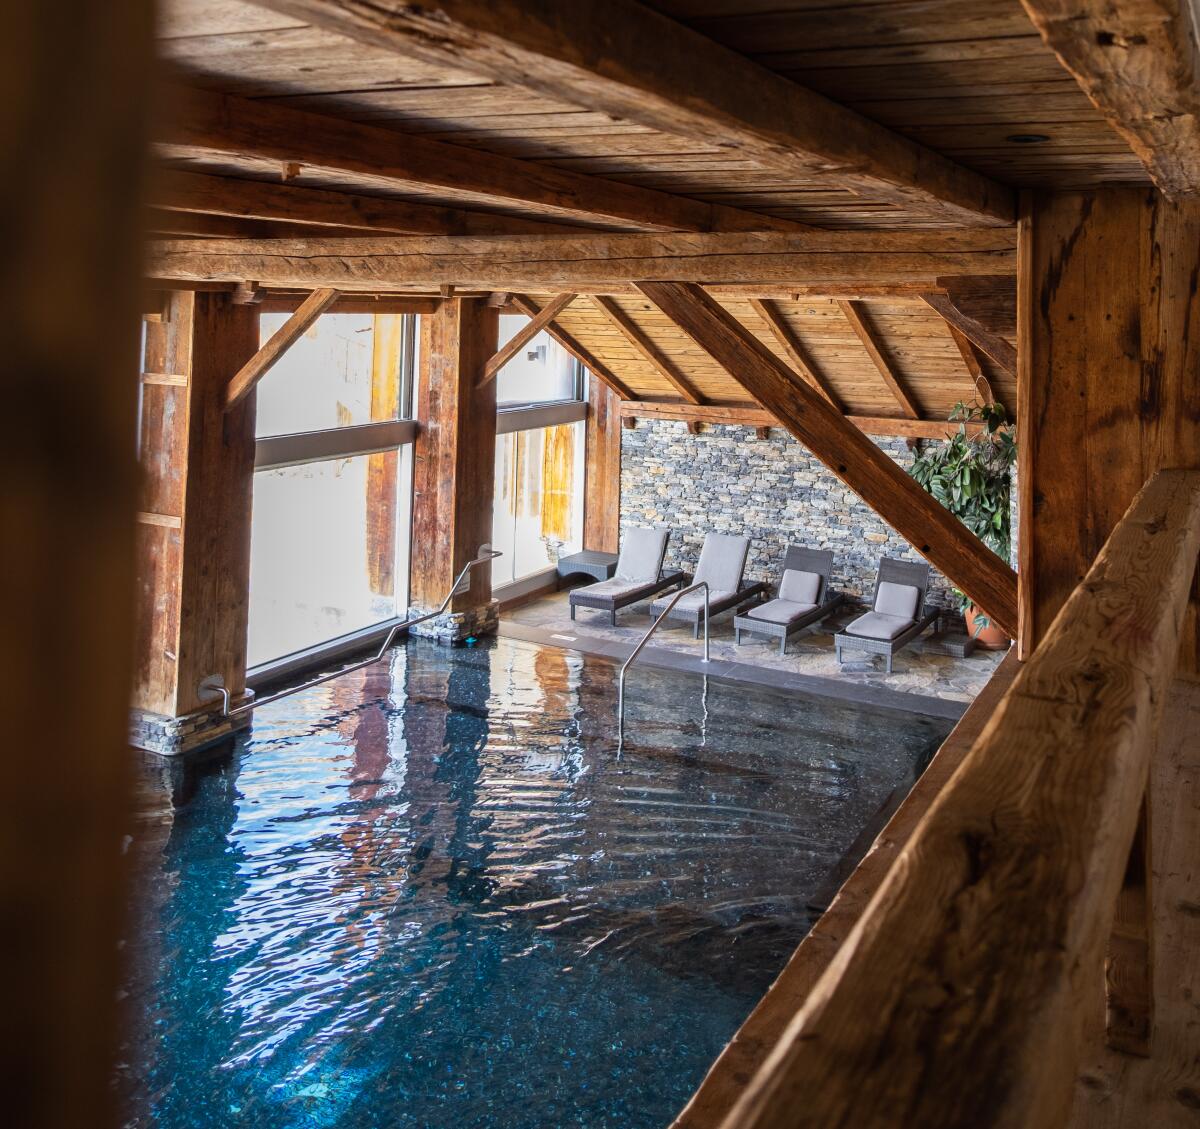 An indoor-outdoor pool rounds out the amenities at Hostellerie du Pas de l'Ours.